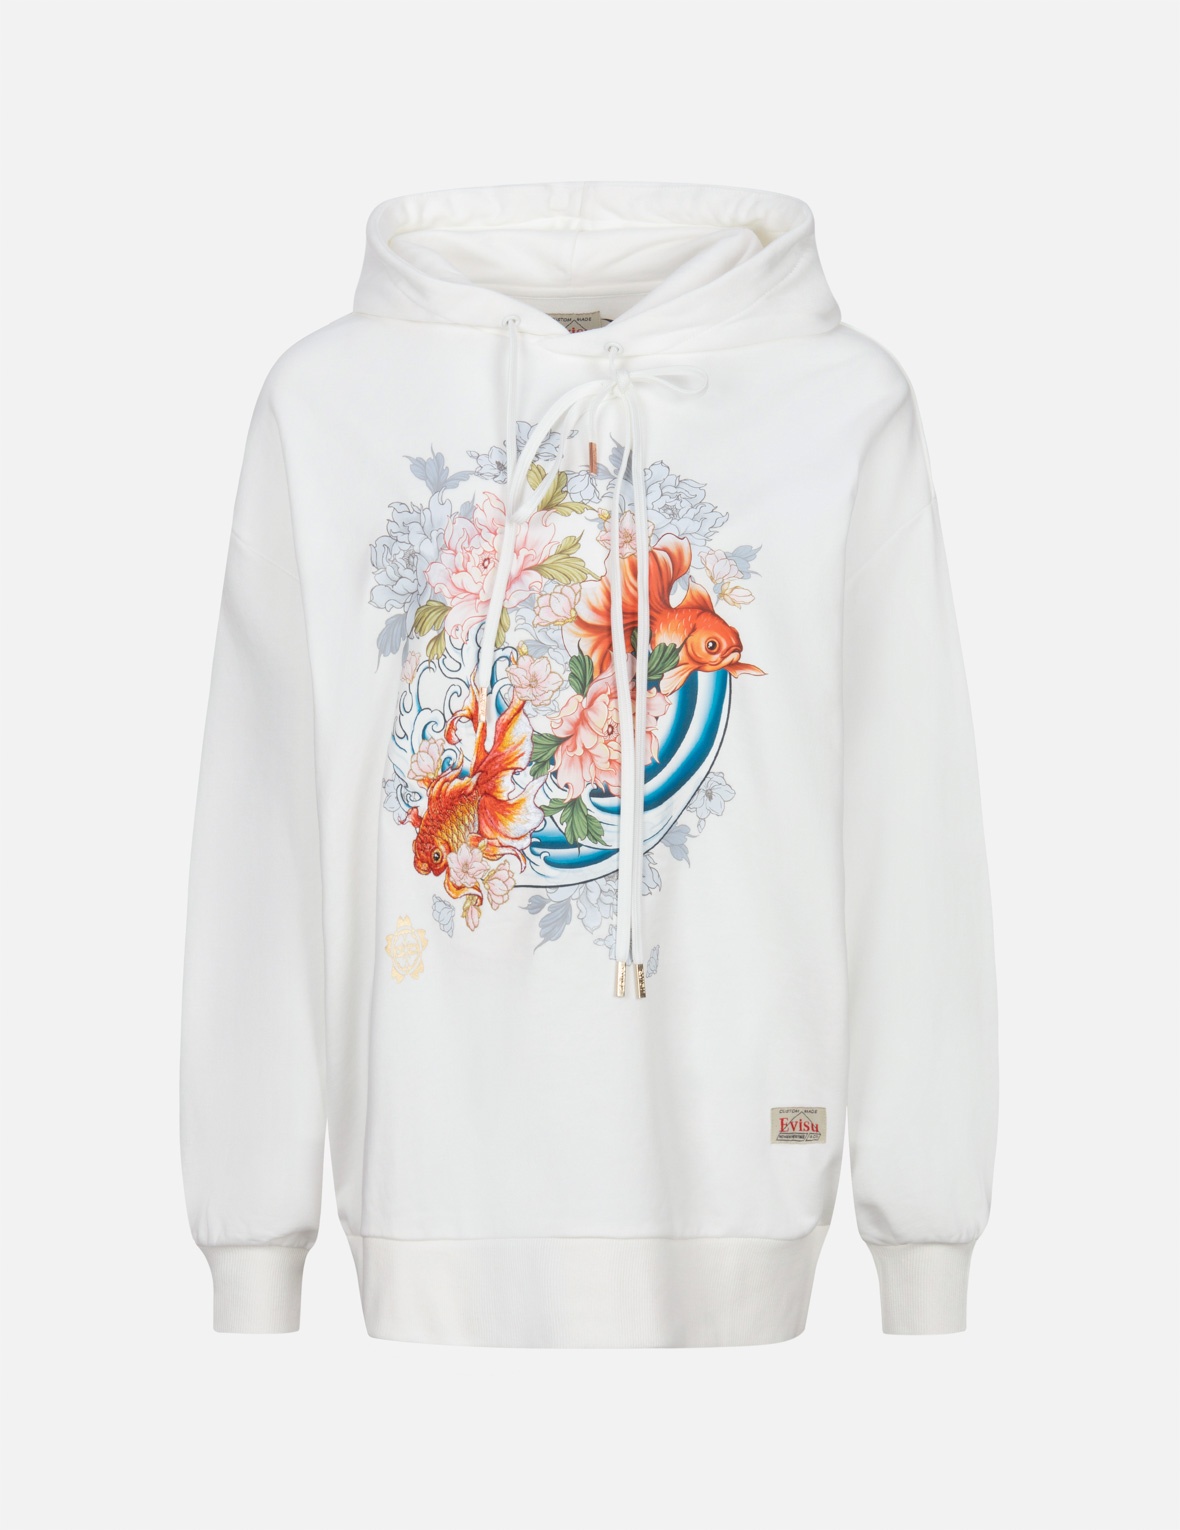 GOLDFISH AND FLORAL FLOW PRINT OVERSIZED HOODIE - 1